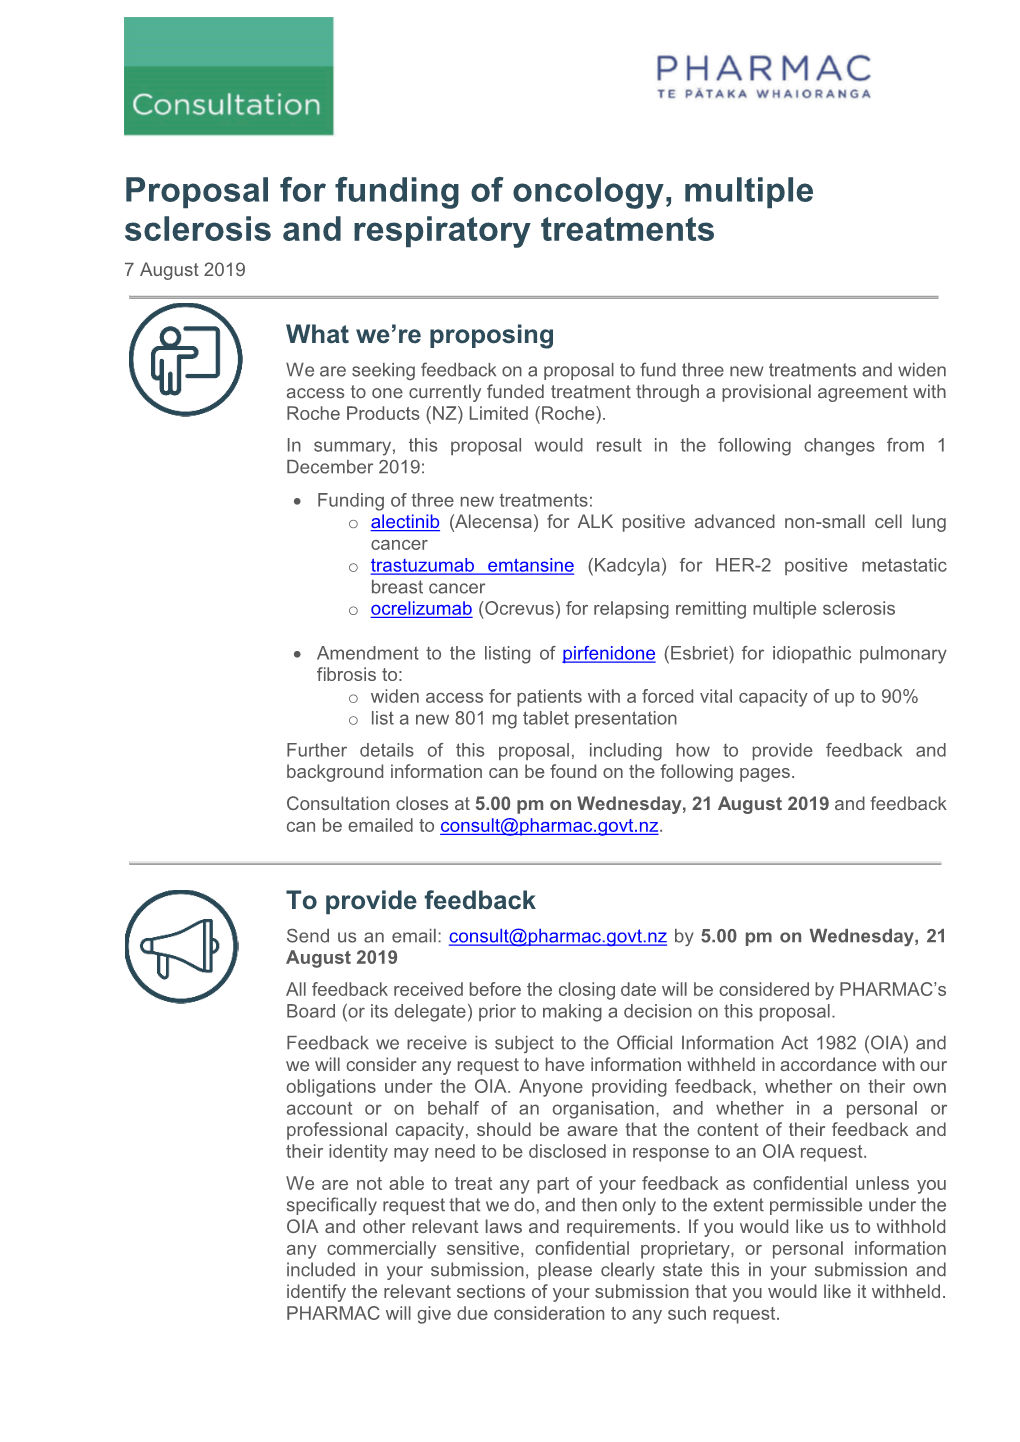 Proposal for Funding of Oncology, Multiple Sclerosis and Respiratory Treatments 7 August 2019